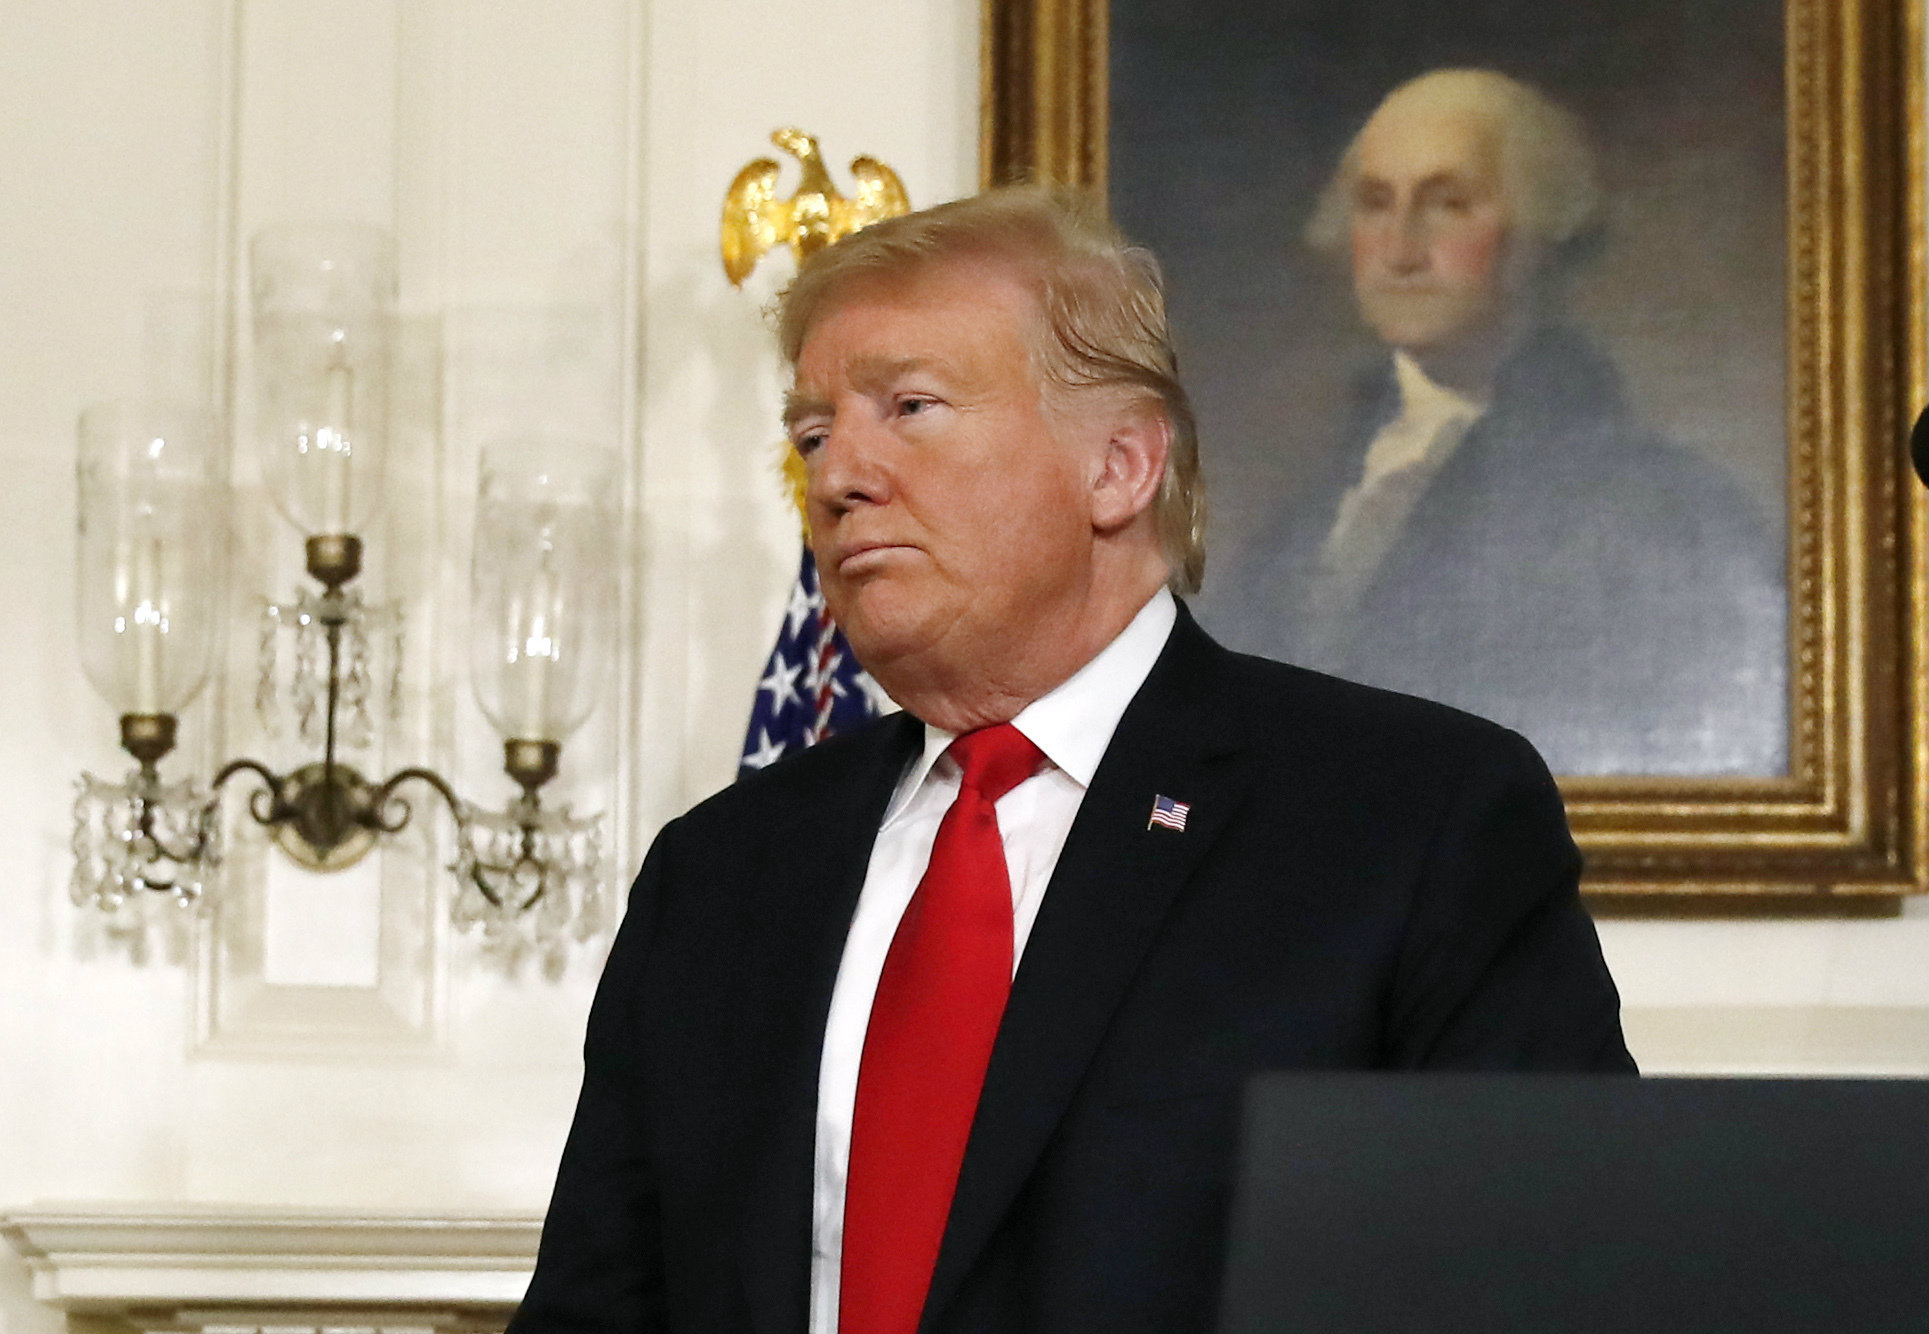 Donald Trump leaves the podium after speaking about the partial government shutdown, immigration and border security in the Diplomatic Reception Room of the White House, in Washington, on Saturday.